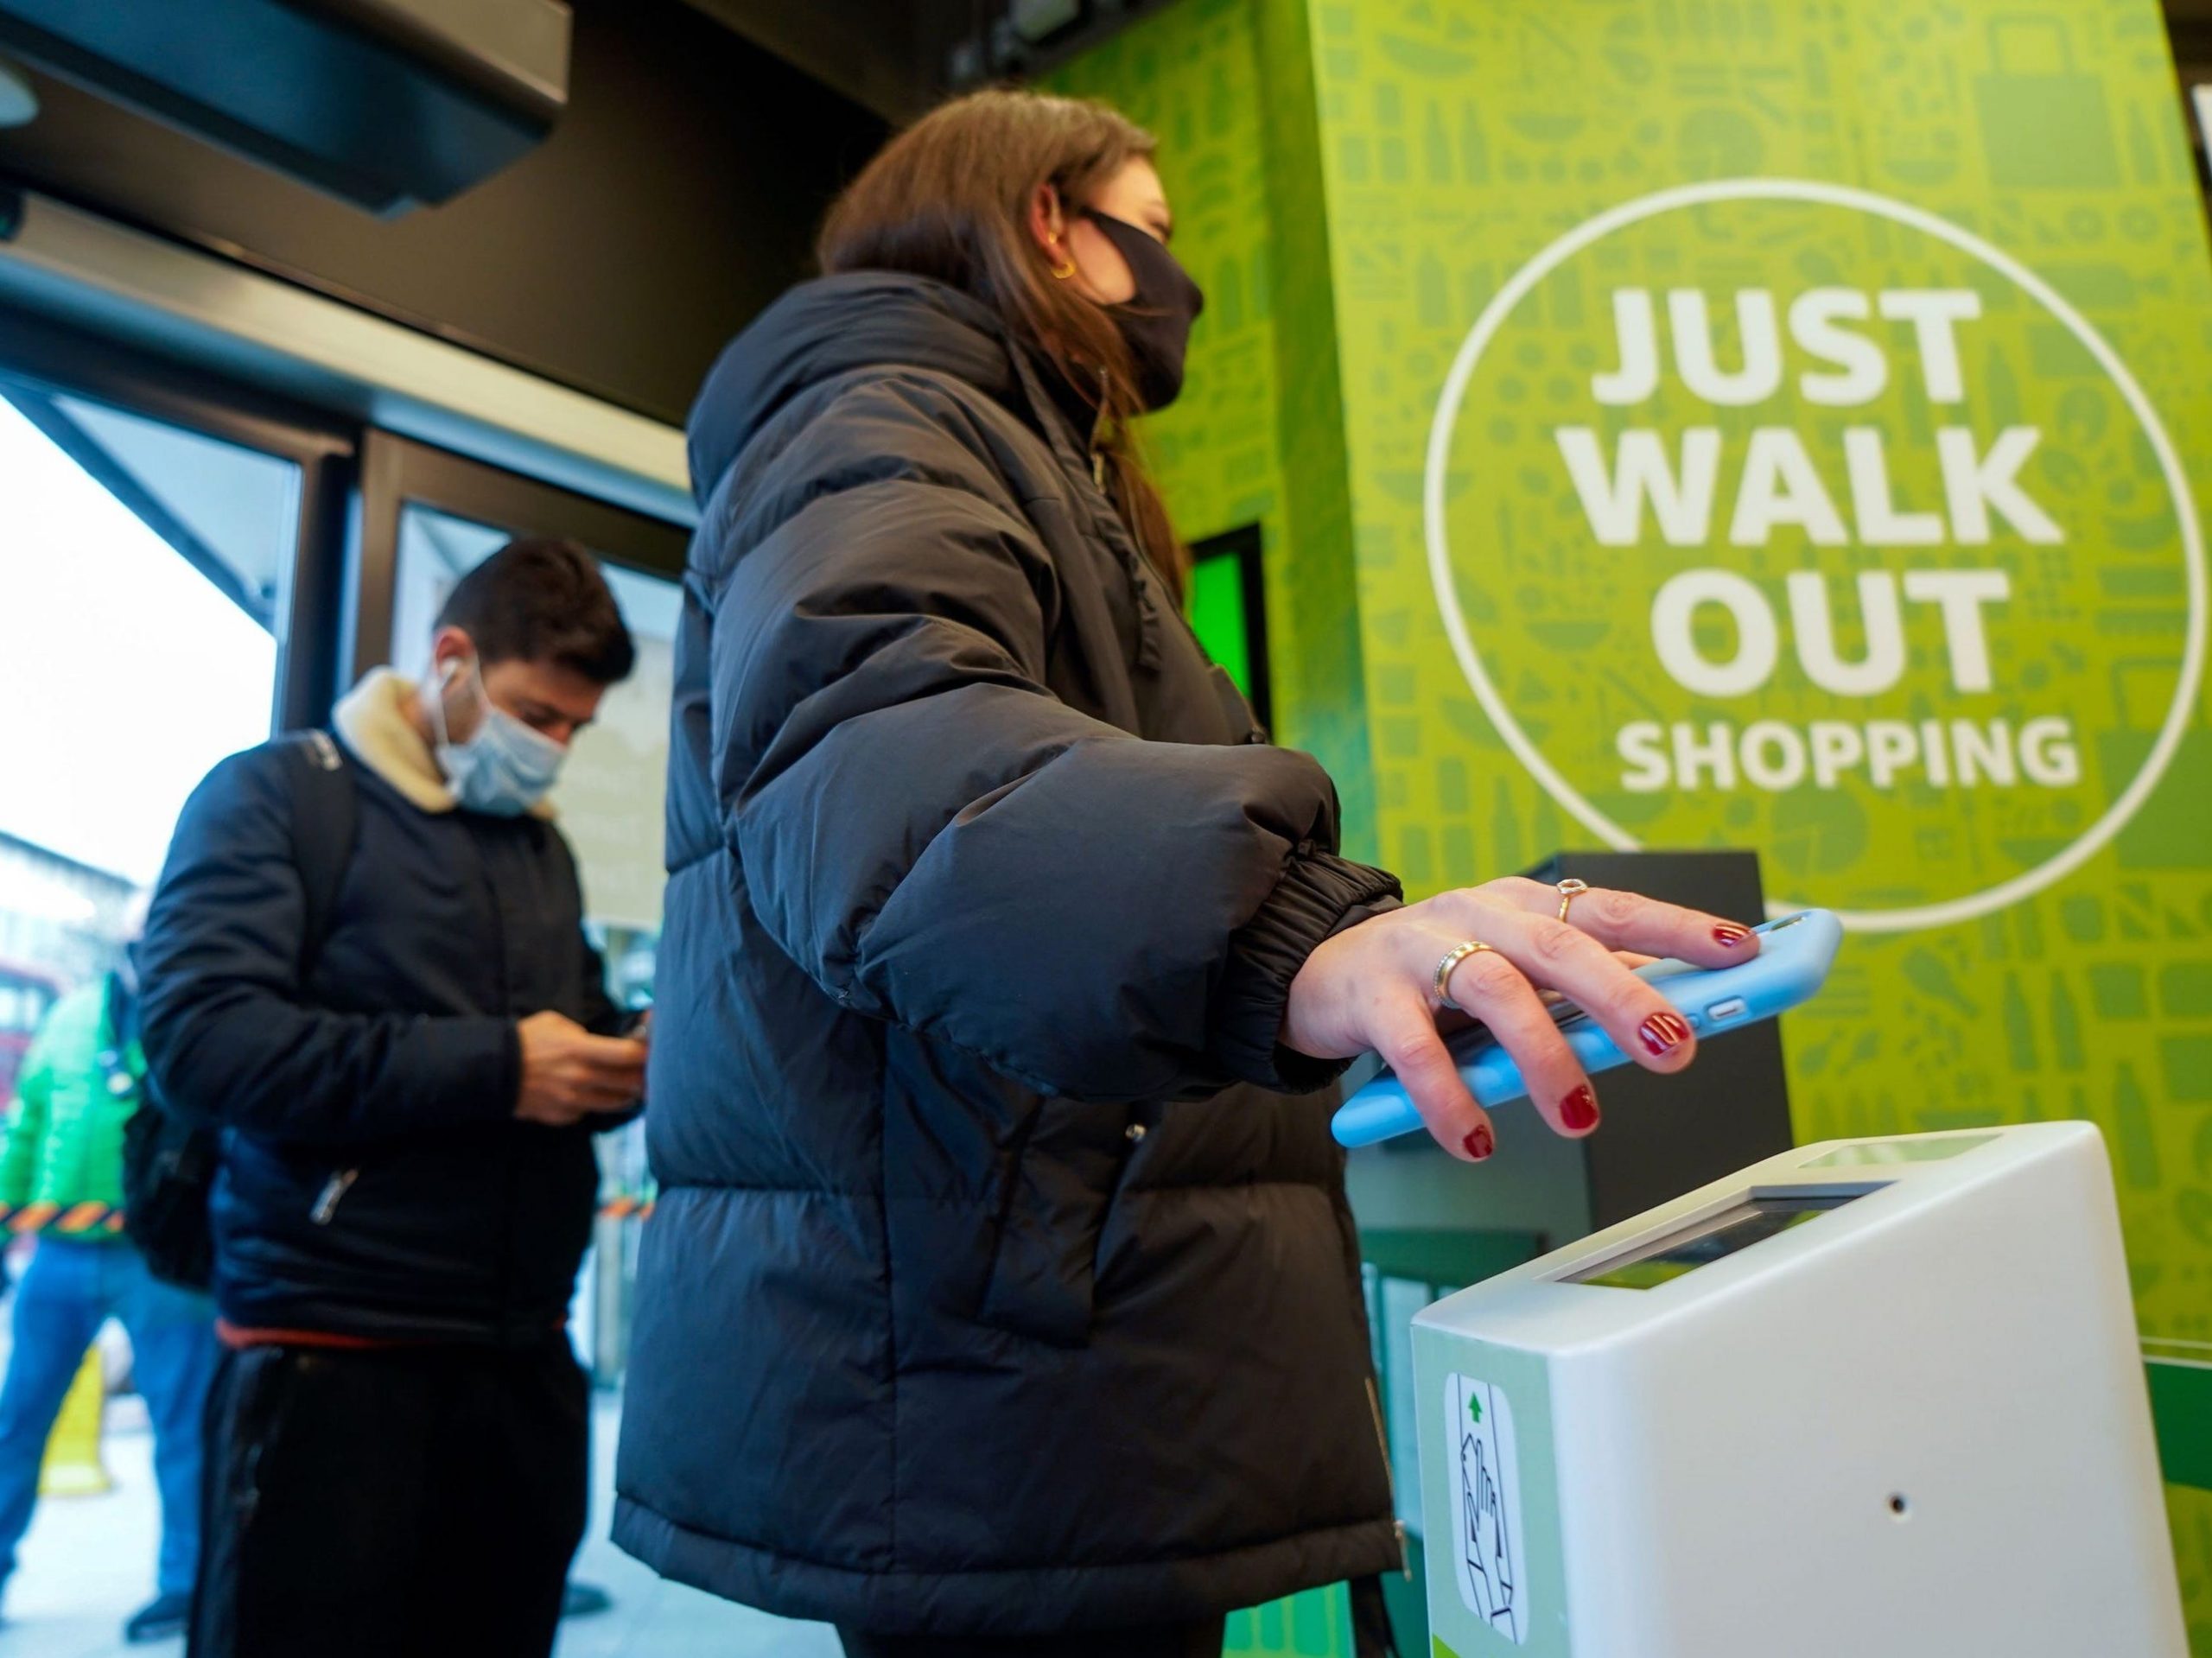 A customer scans her phone as she enters Amazon's new Amazon Fresh store in Ealing, west London, on March 4, 2021.